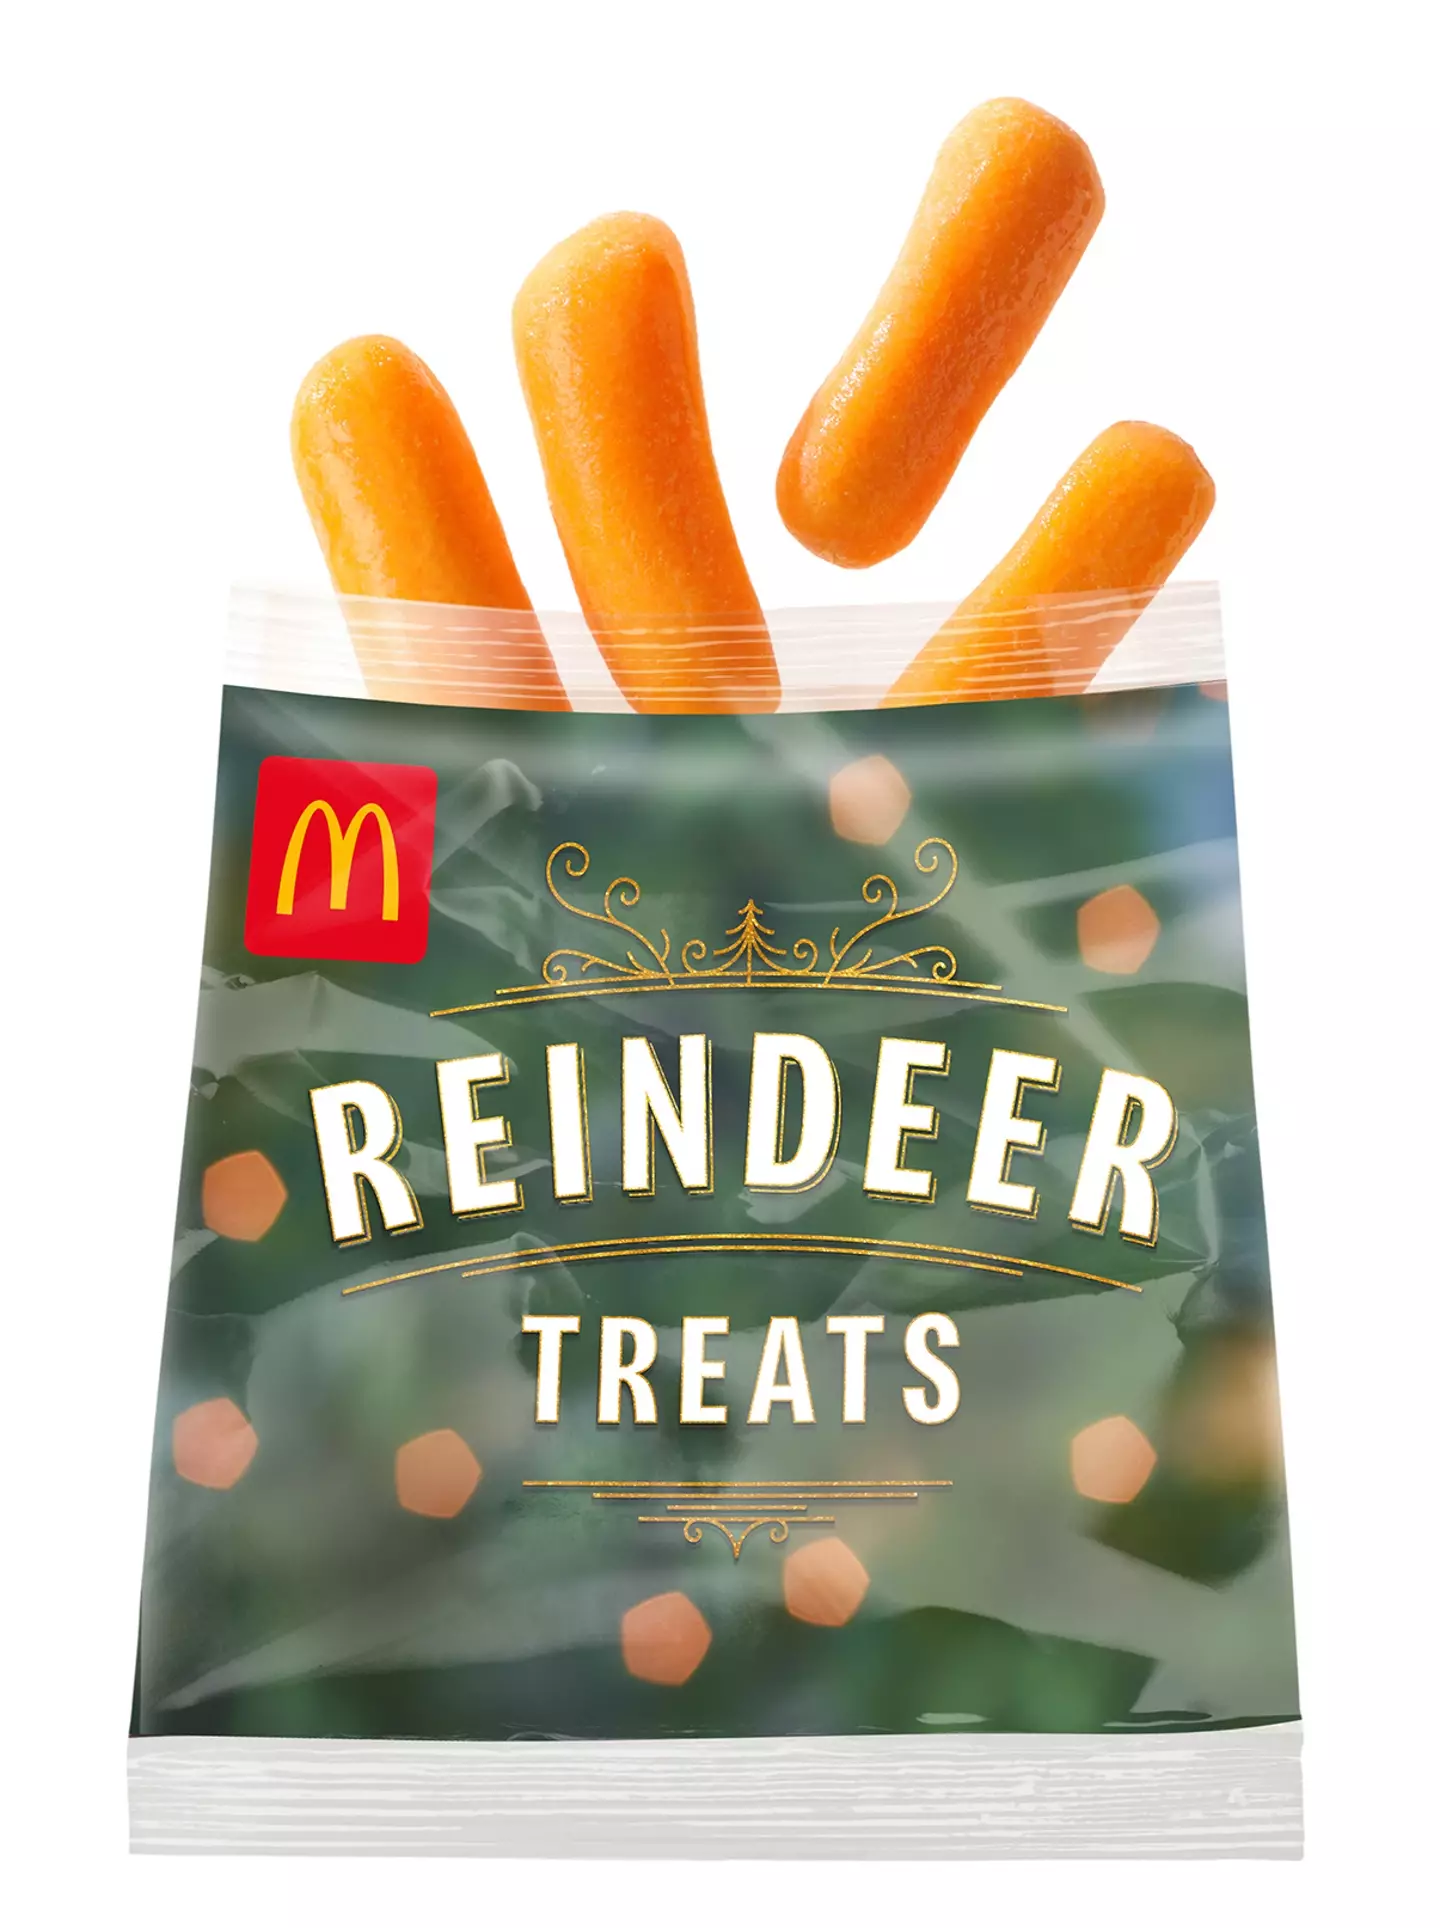 You can get free reindeer treats on Christmas Eve (